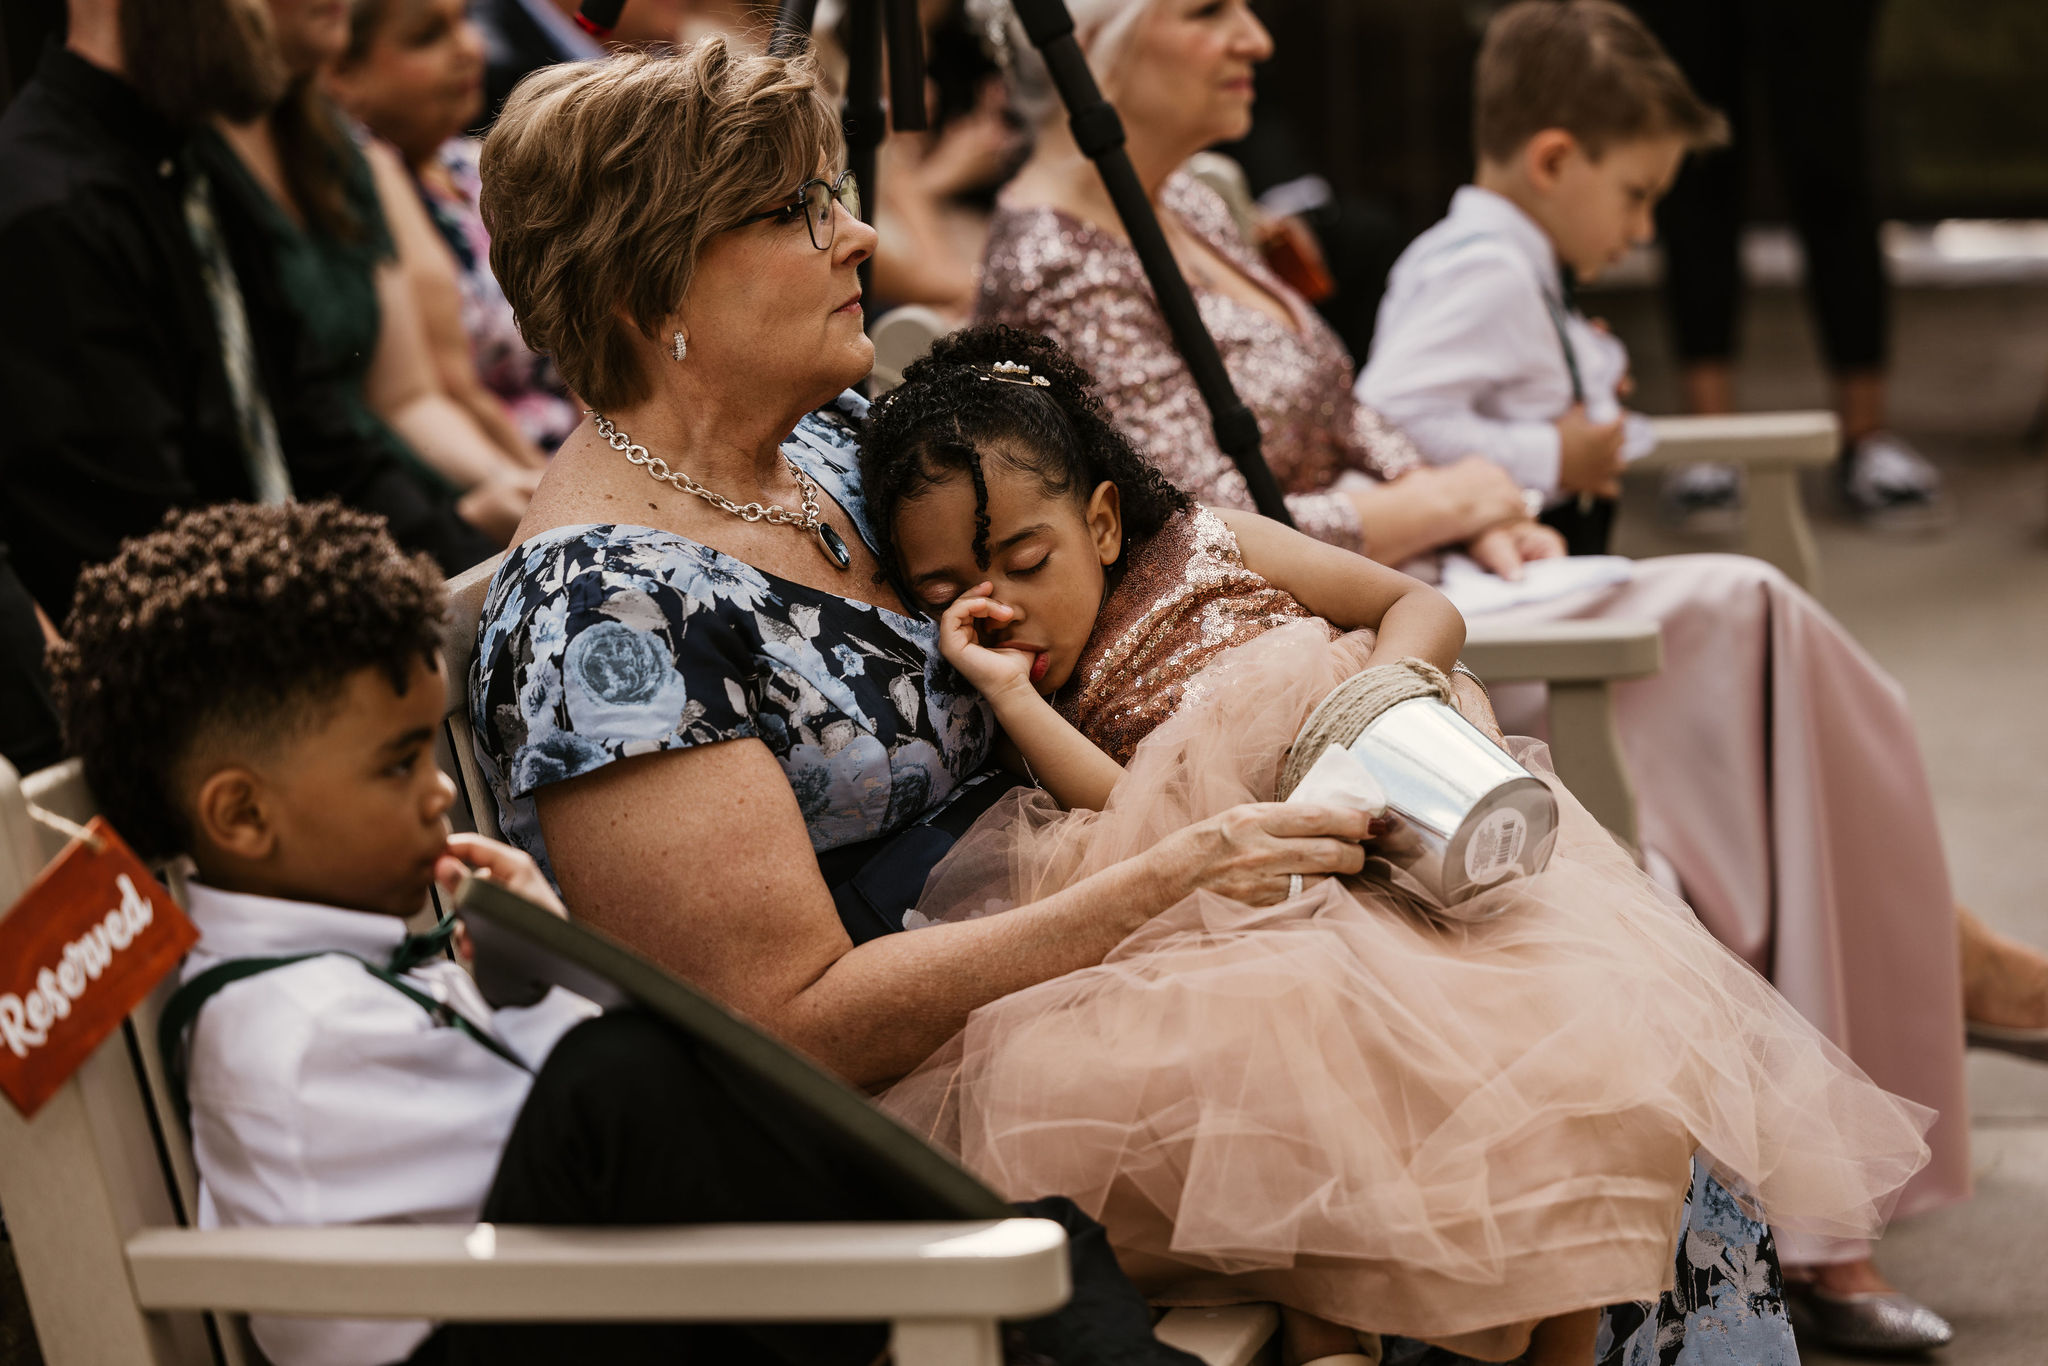 grandmother watches kids during a wedding in colorado.